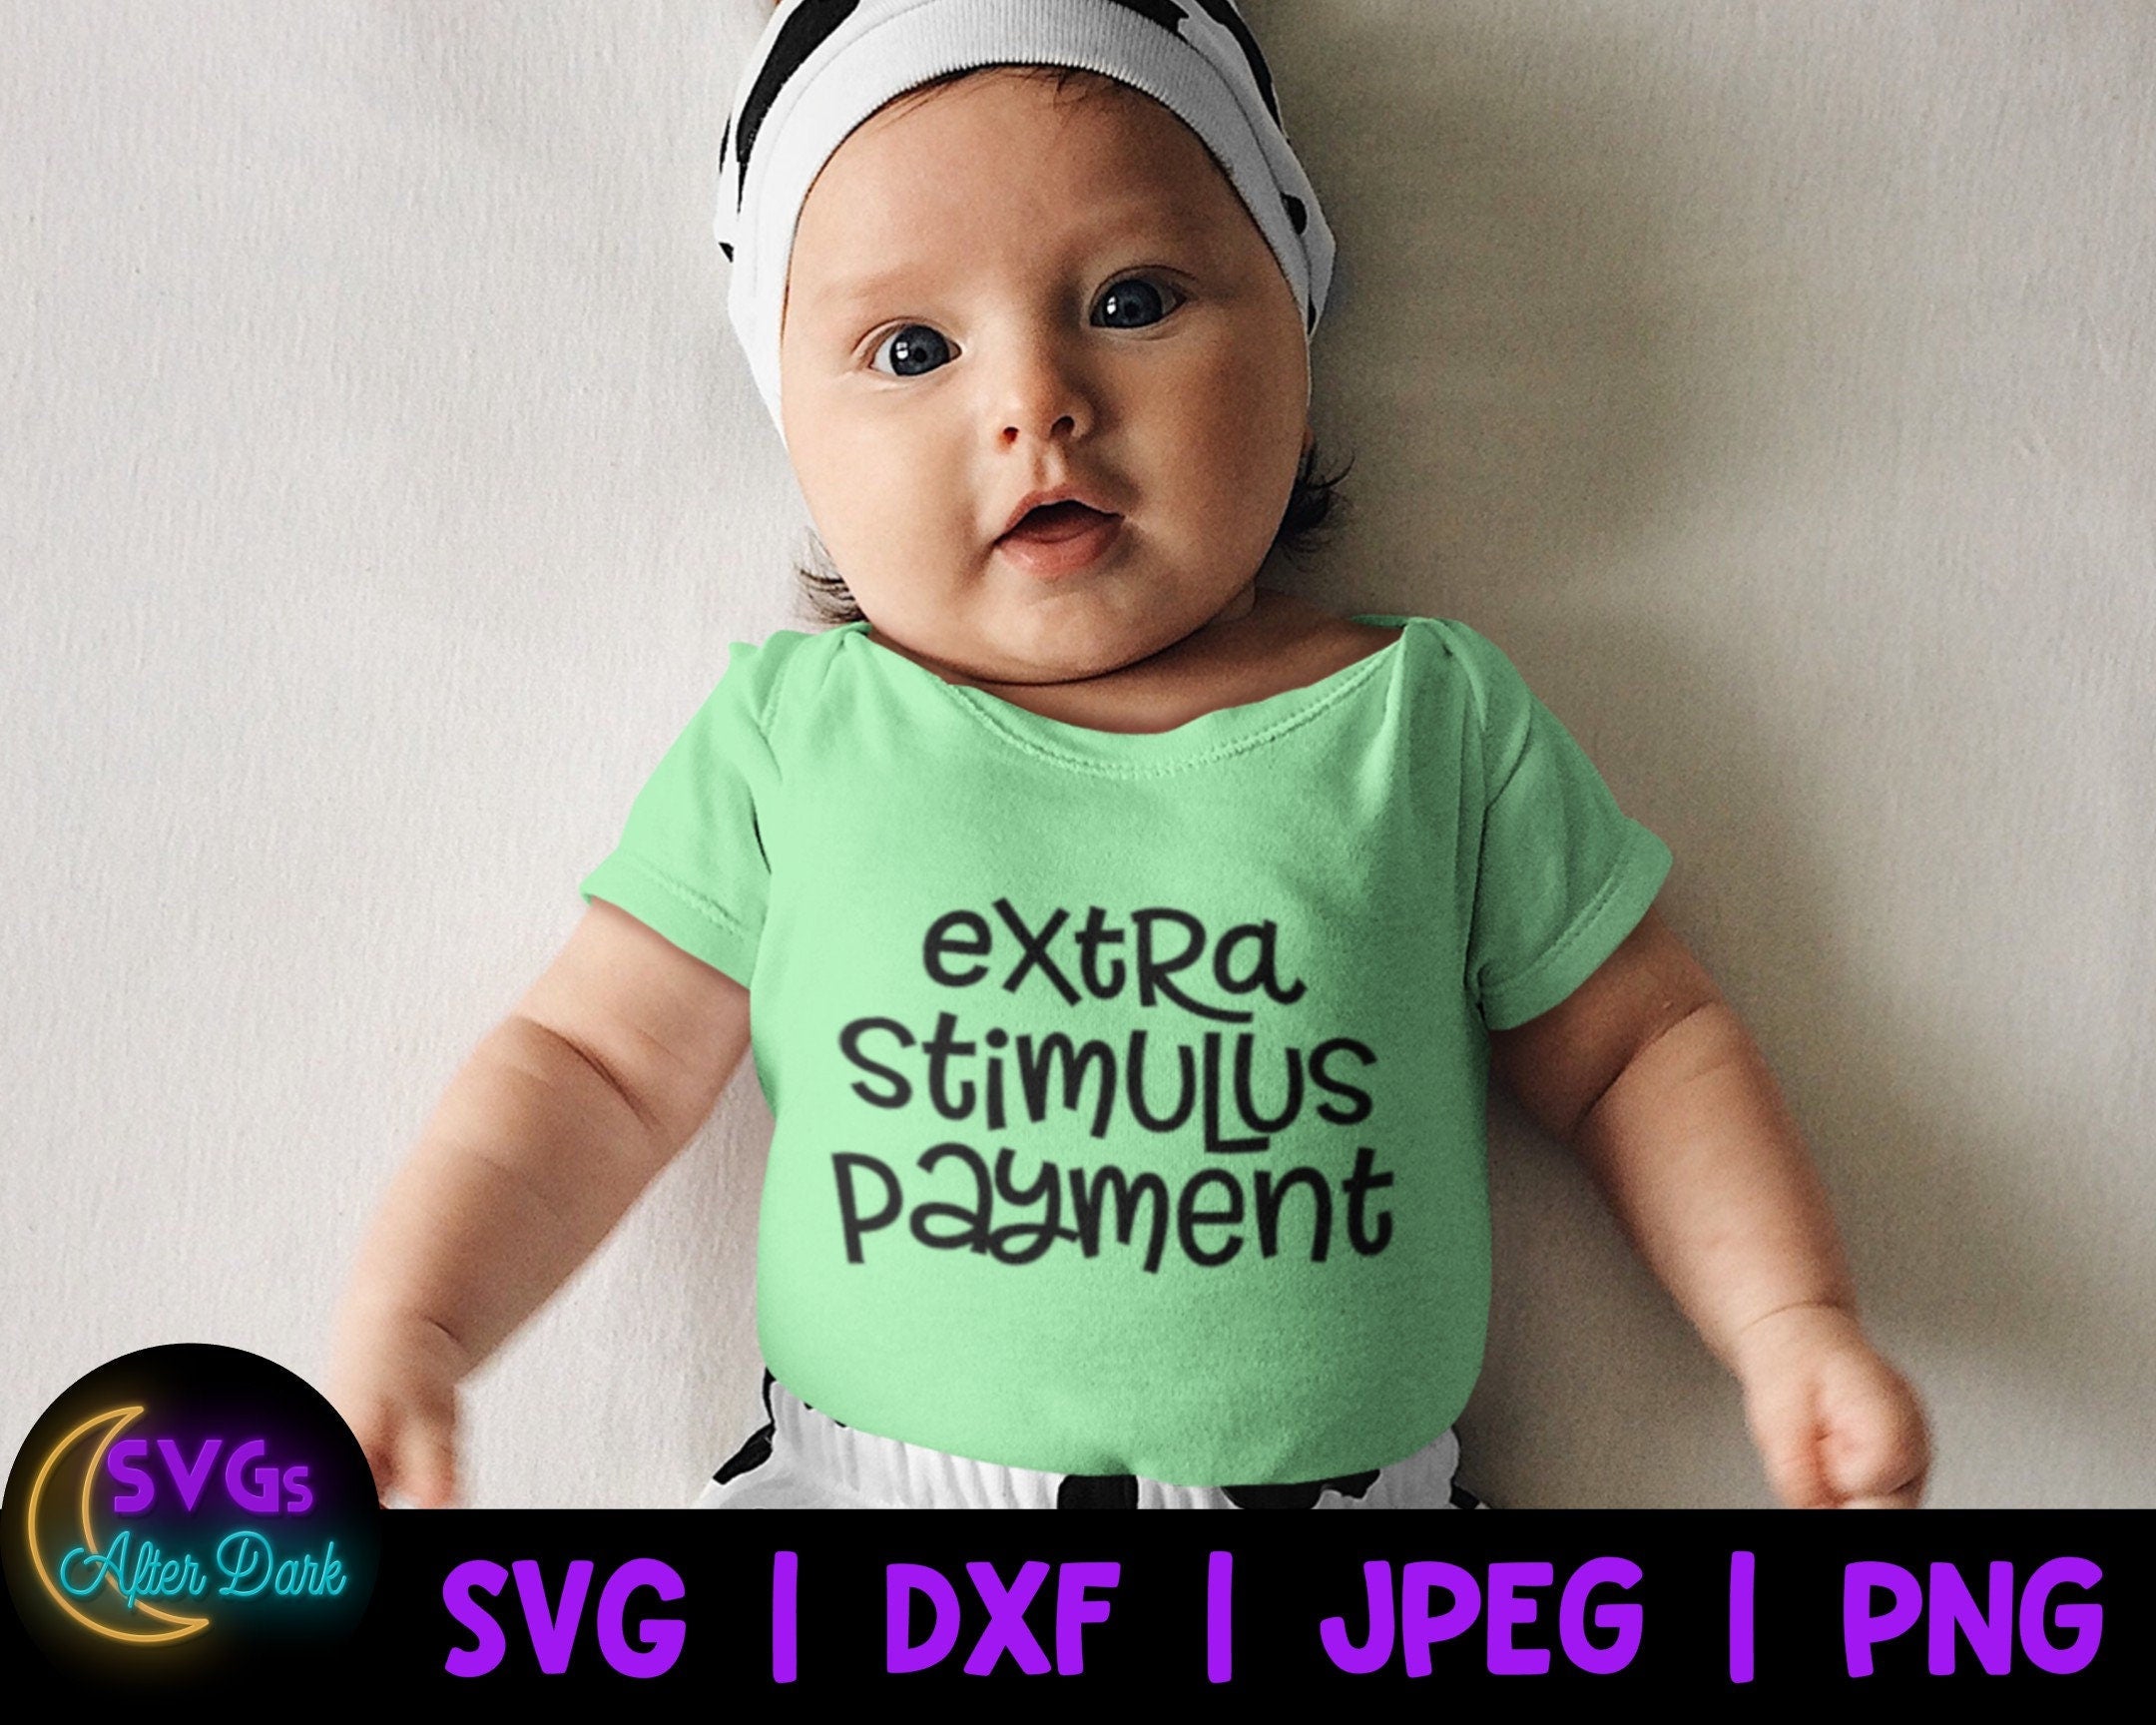 NSFW SVG - Extra Stimulus Payment SVG - Adult Humor Baby Bodysuit